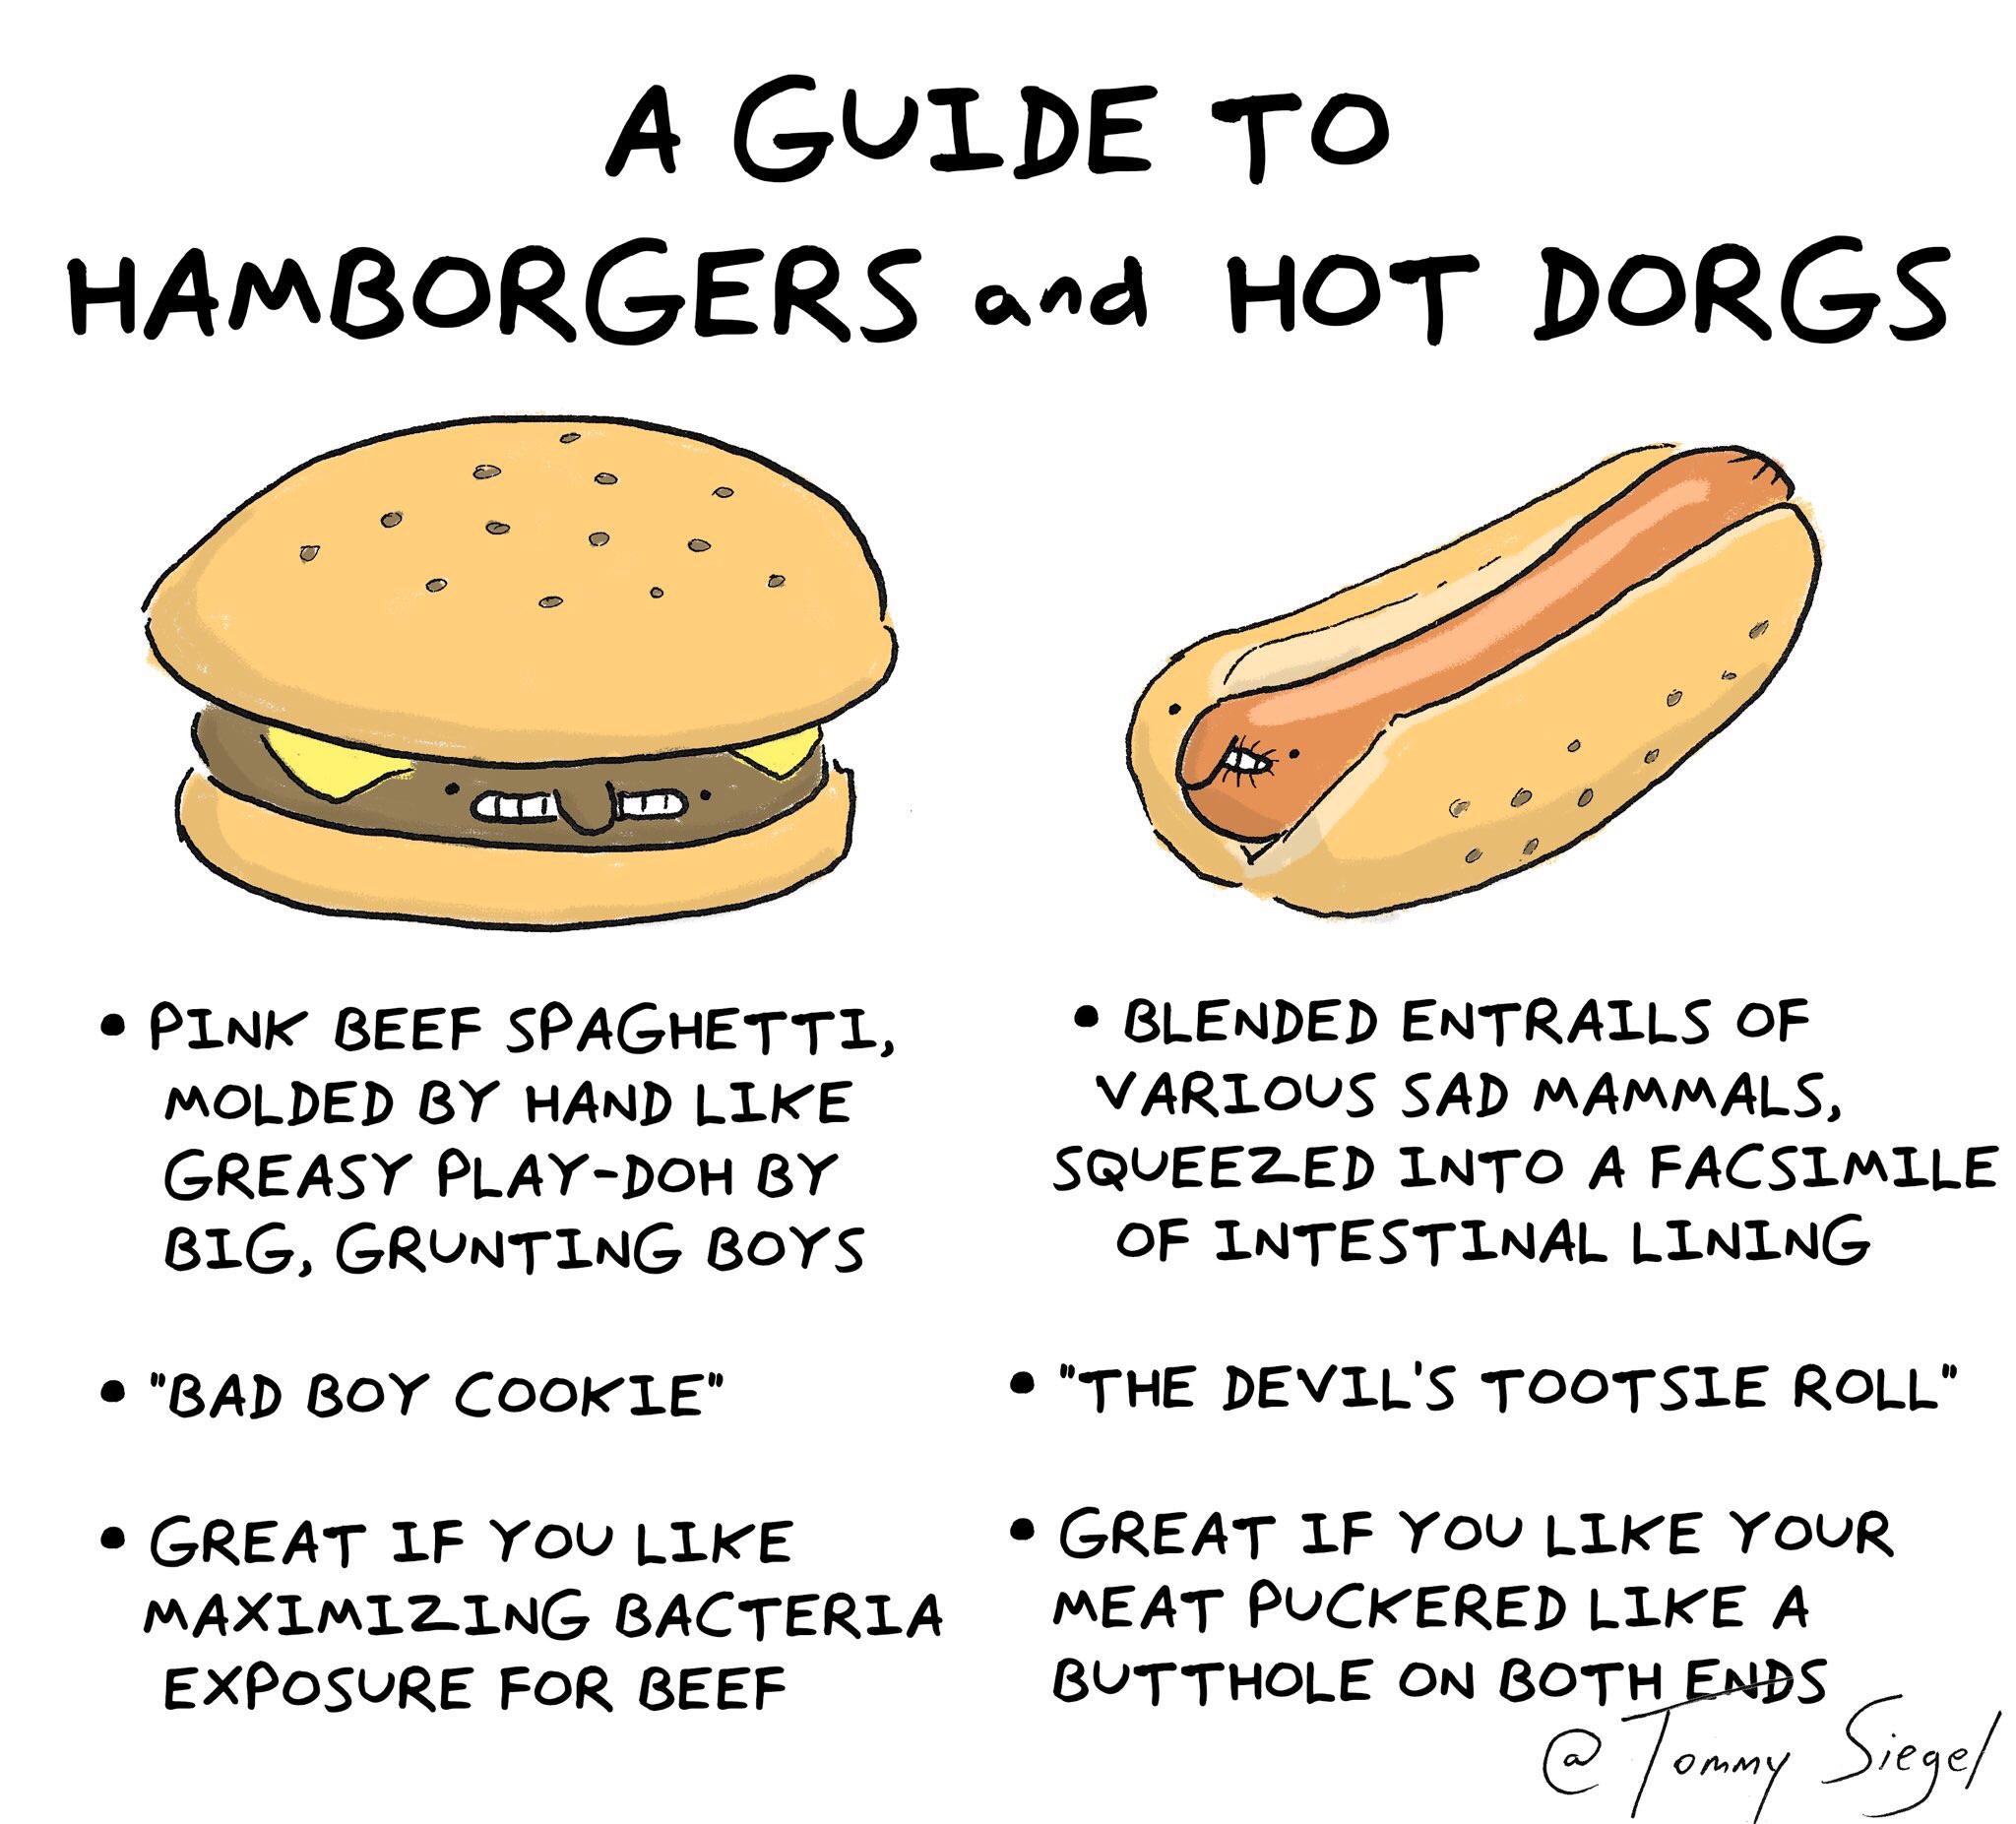 hamburgers and hot dogs: a guide